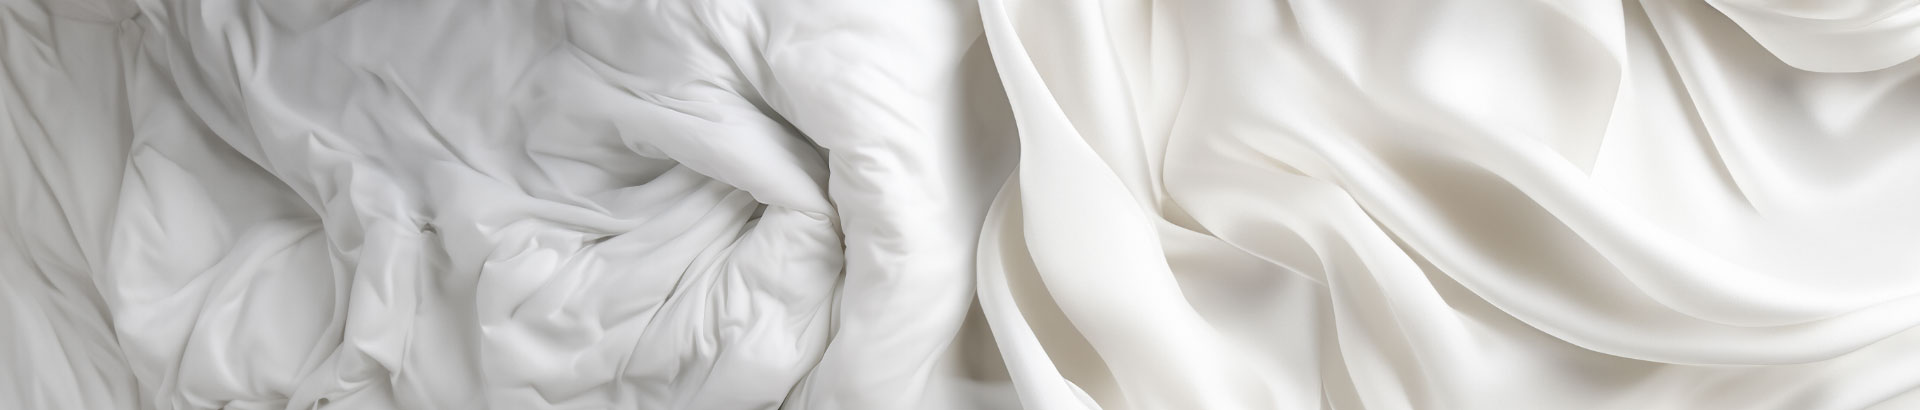 Comparing Wool duvets with silk duvets to compare comfort and heat.